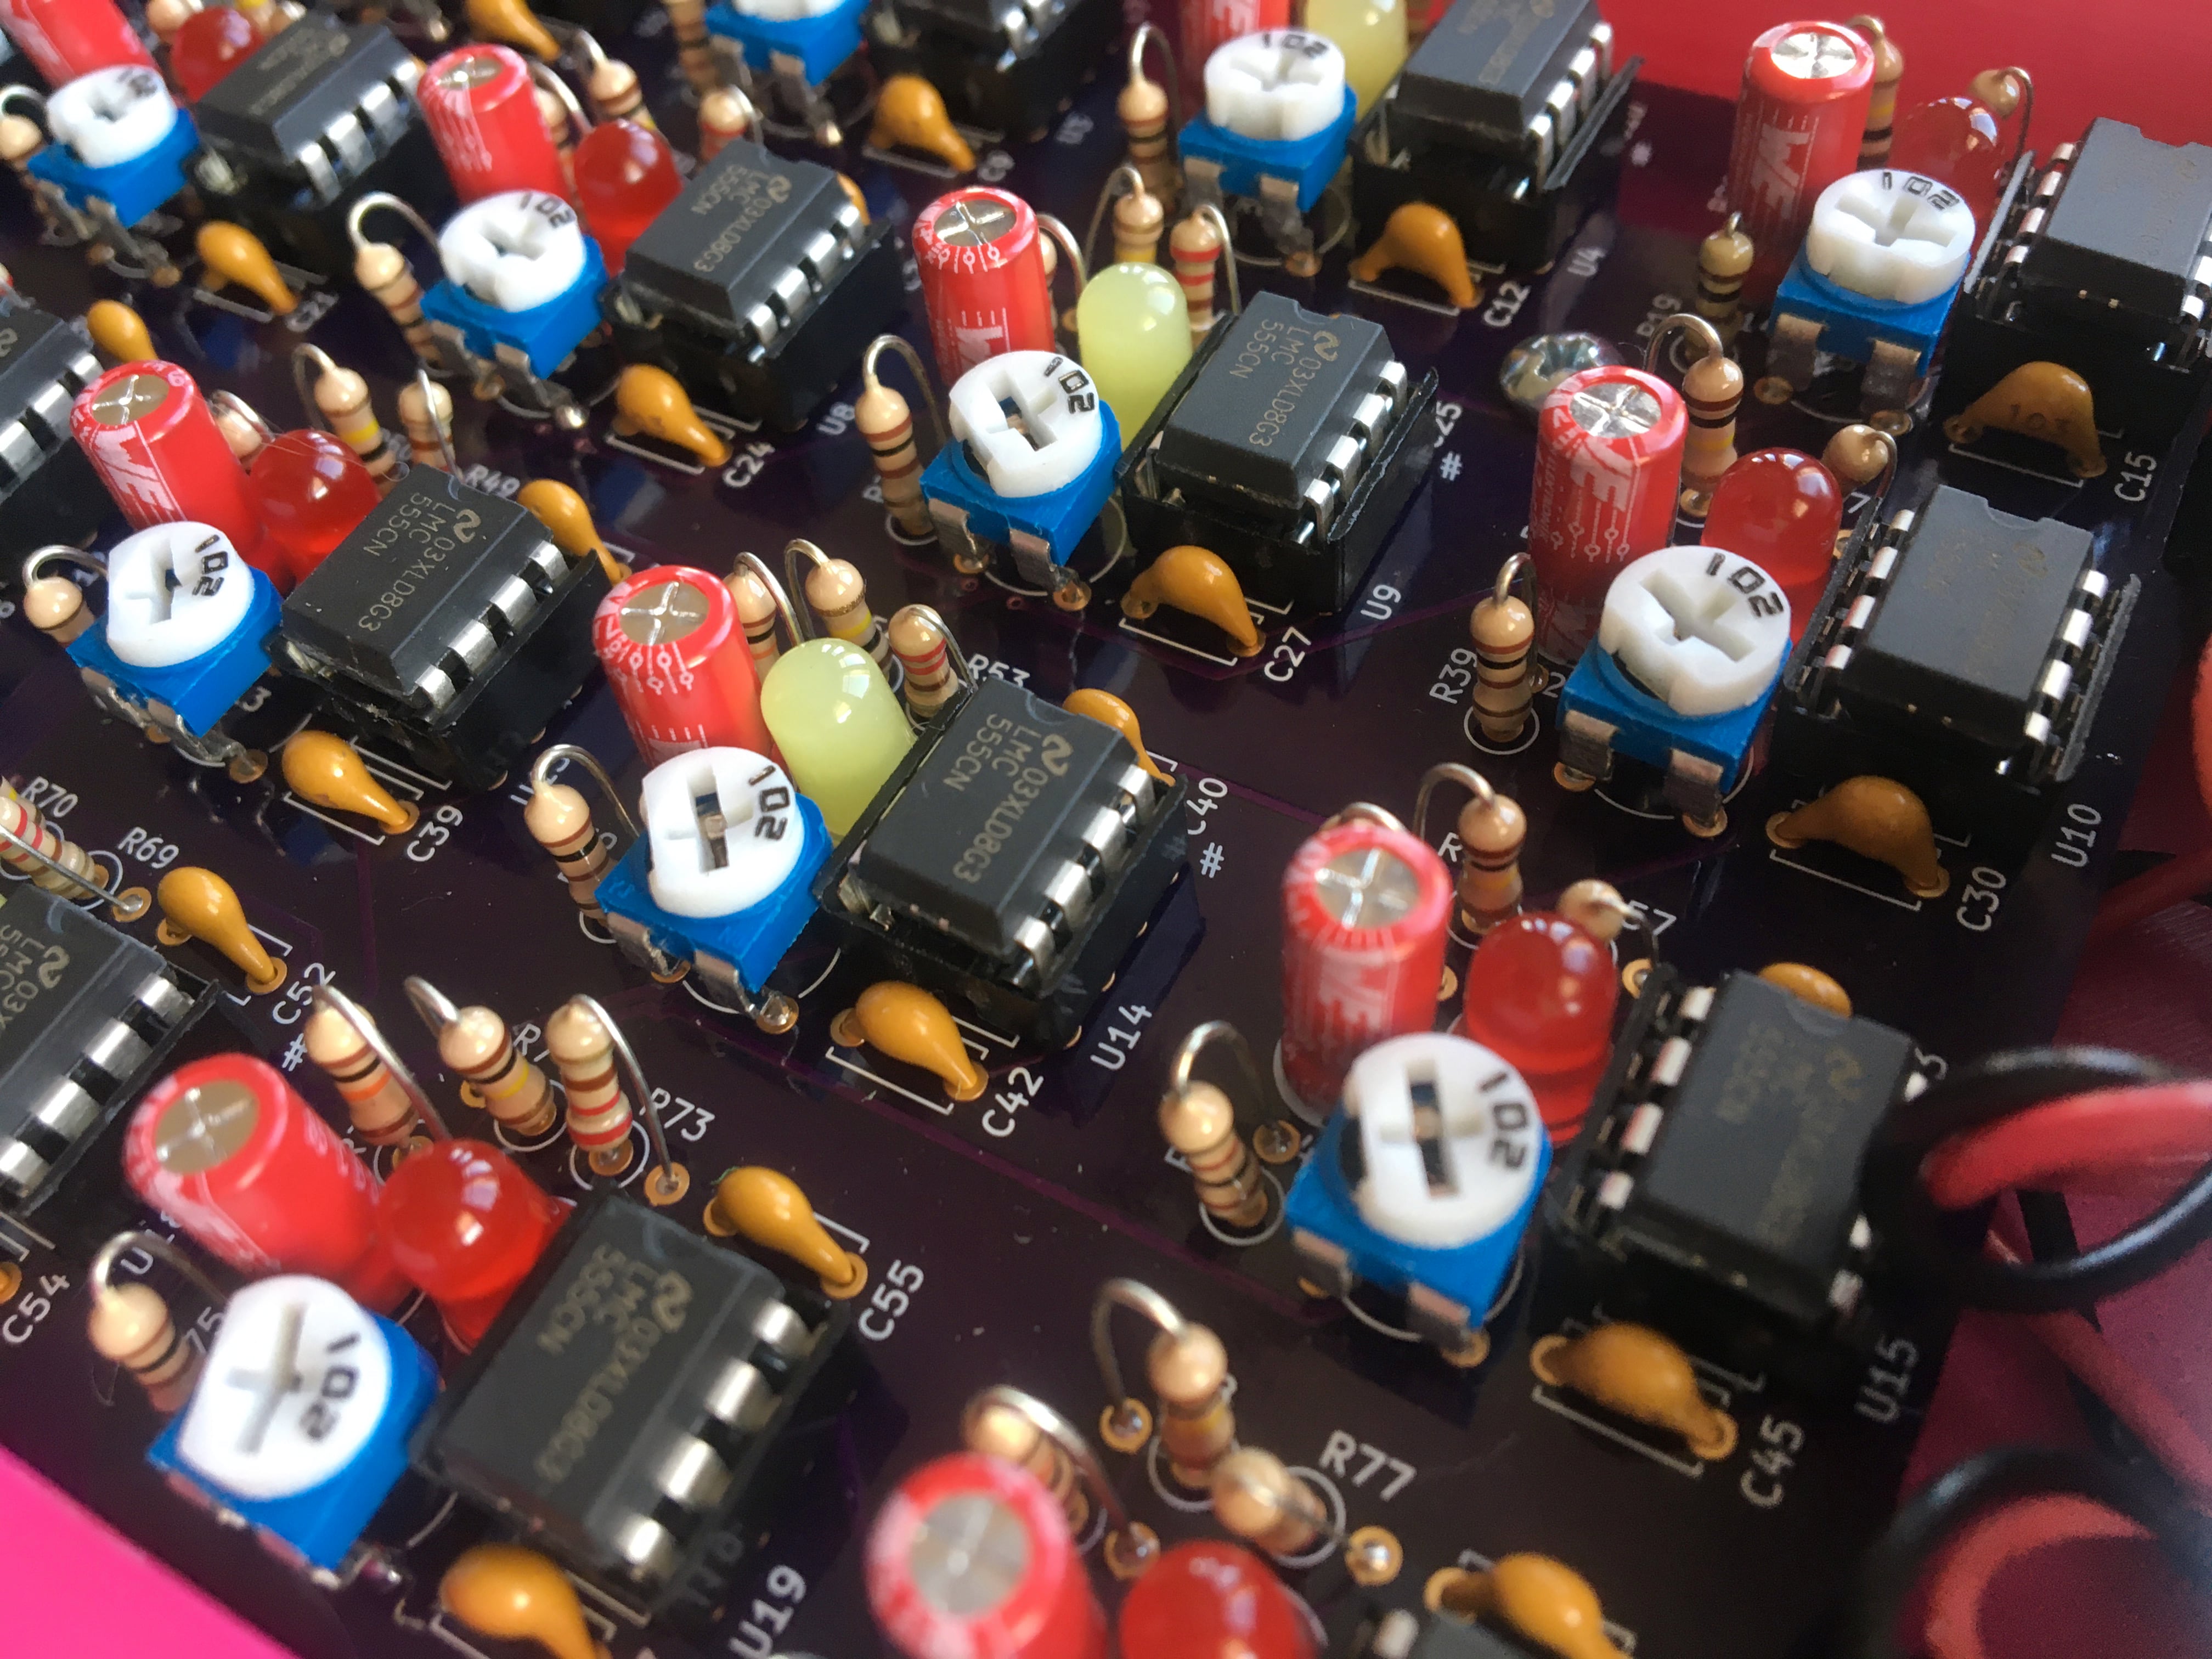 A glamorous closeup of the 555 circuits, with accidentals marked with # sign